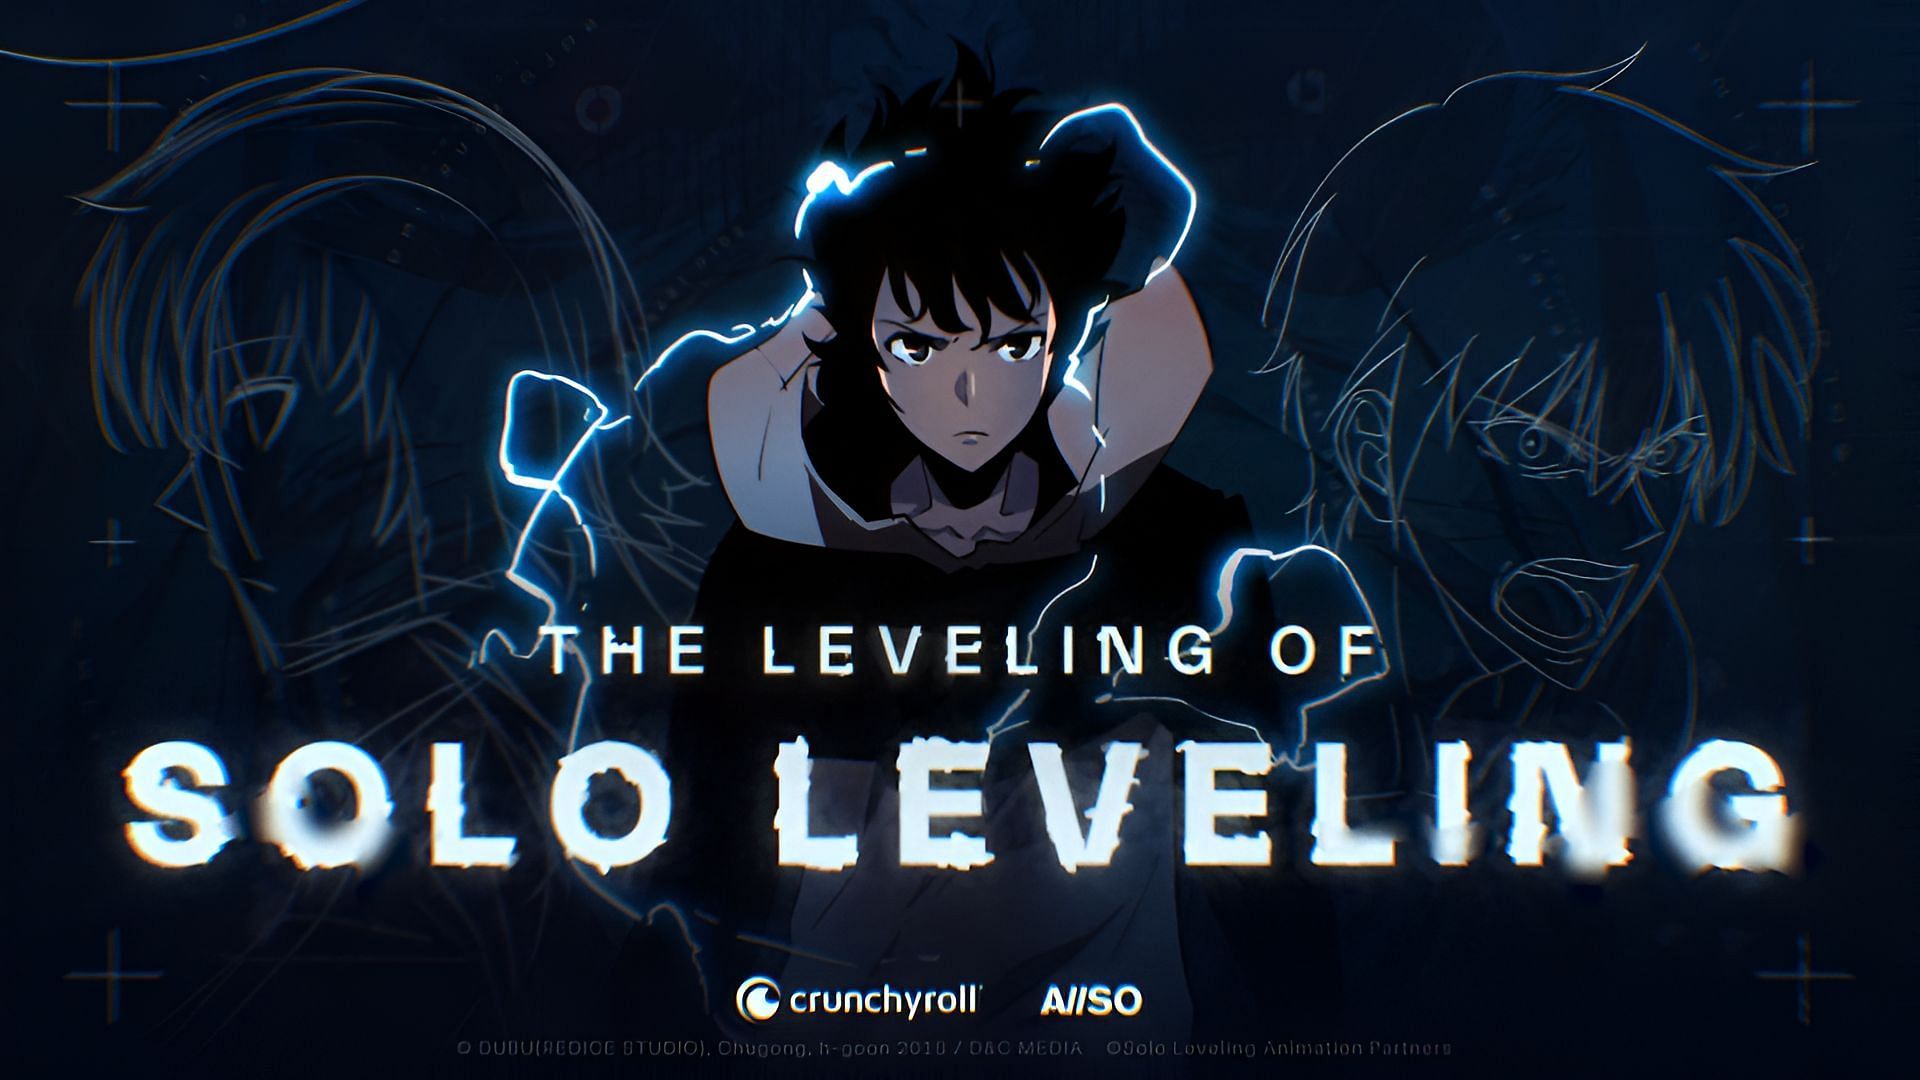 Solo Leveling gets a 2-part documentary (Image via Crunchyroll/AllSo)